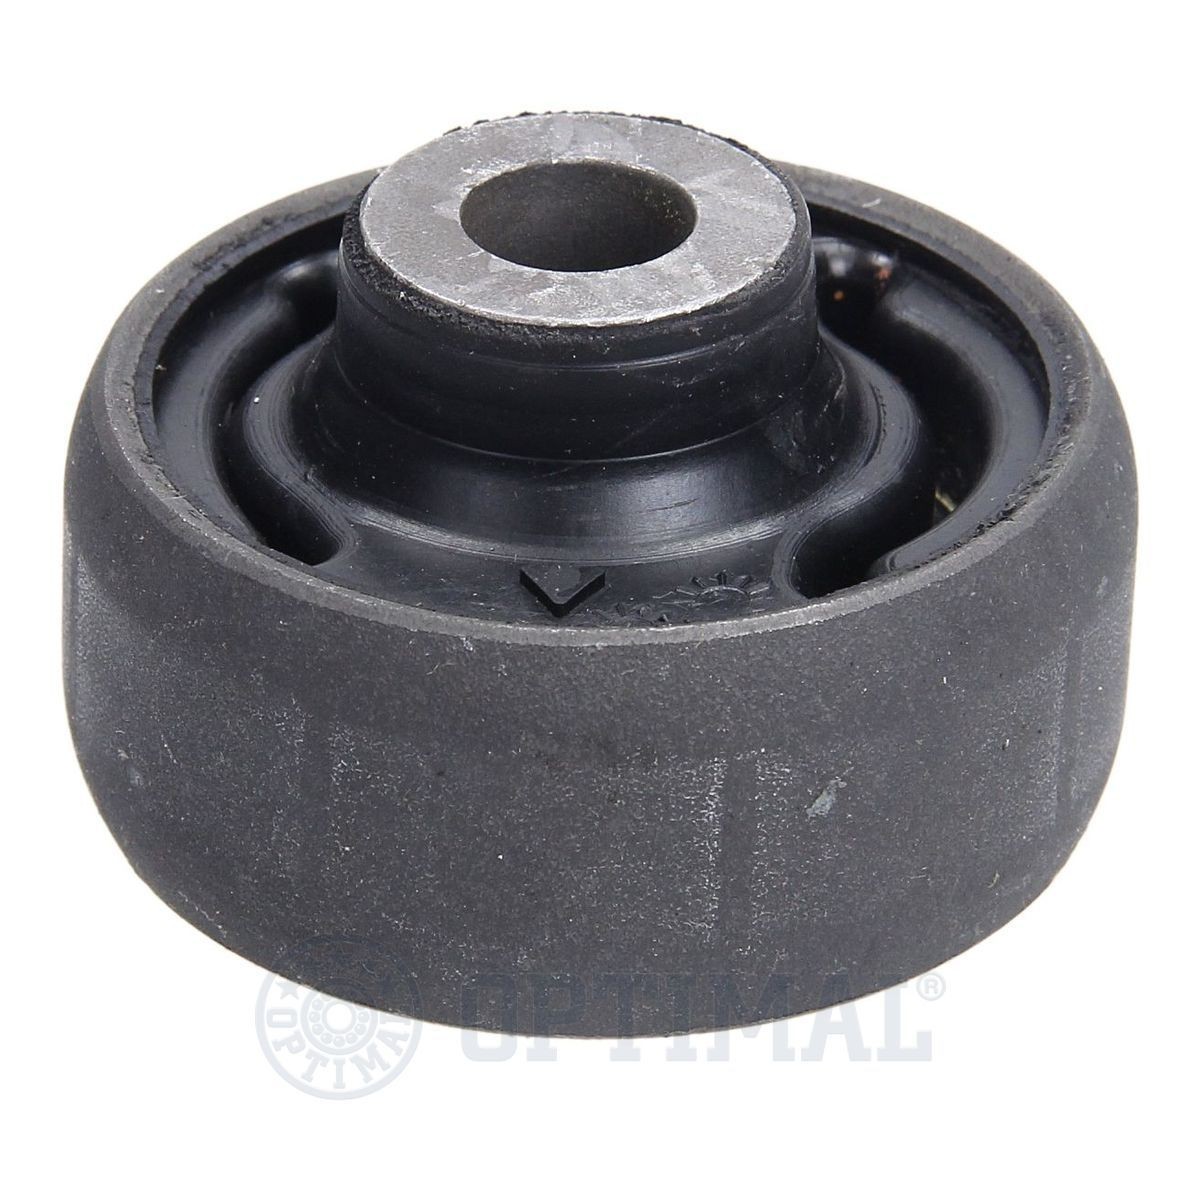 F8-7856 OPTIMAL Suspension bushes SKODA Rear, Front Axle, both sides, Rubber-Metal Mount, for control arm